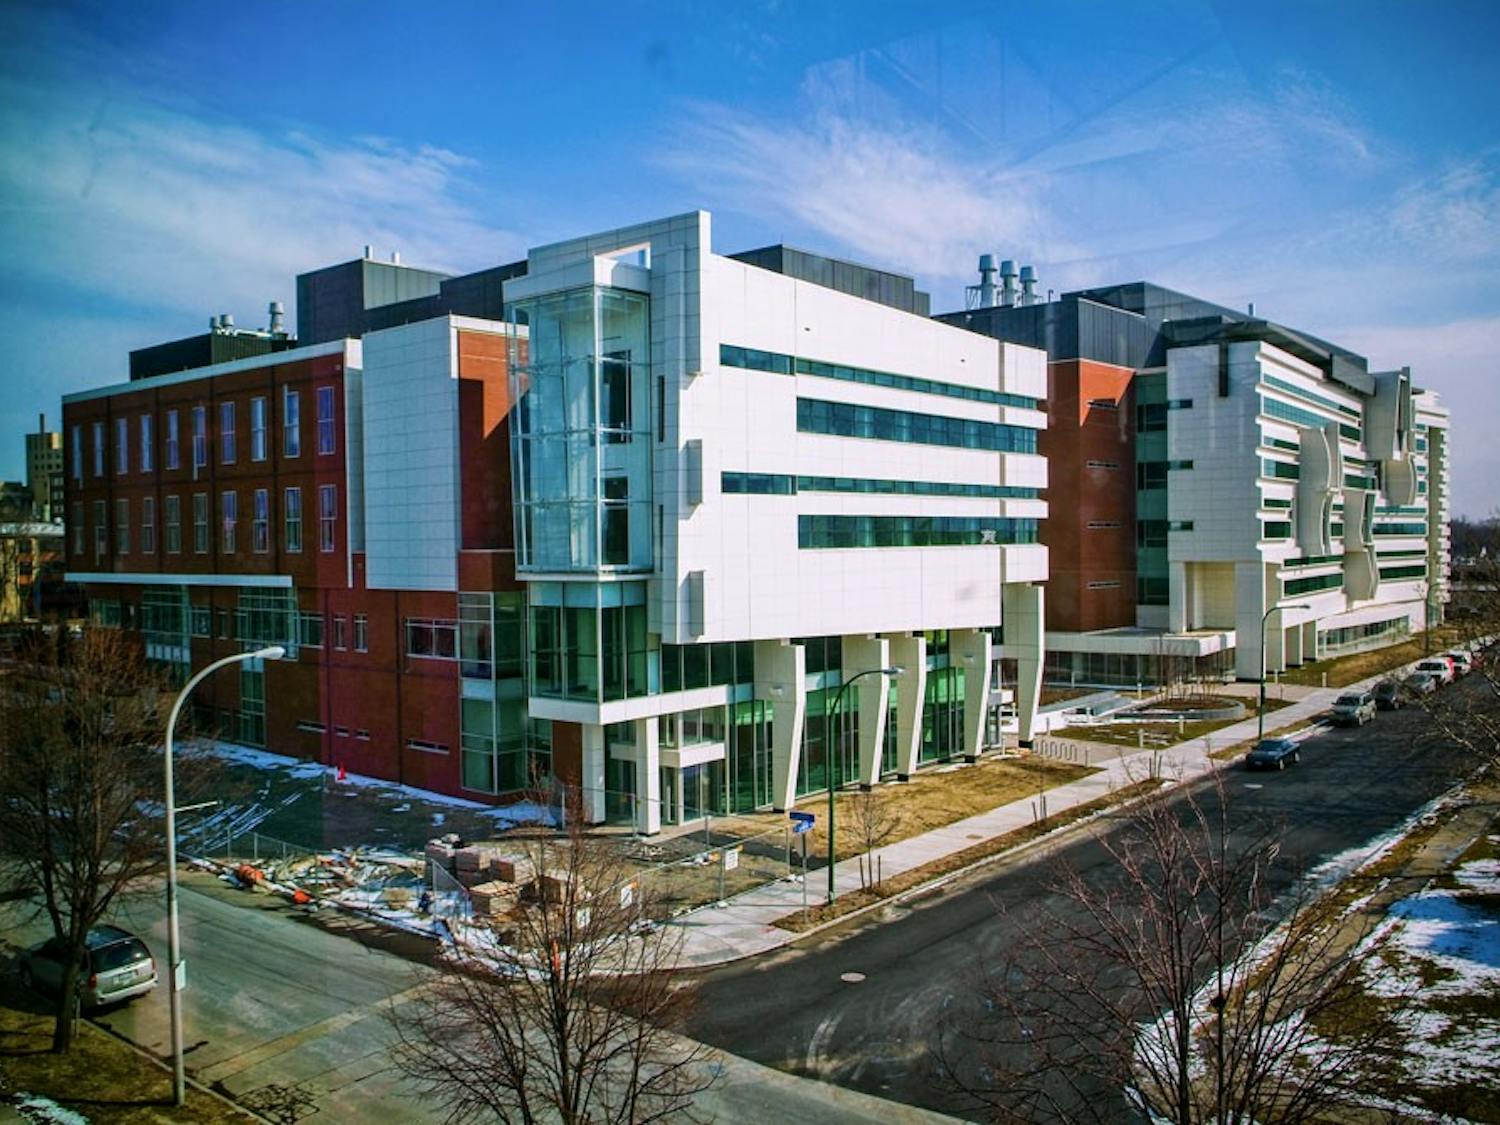 Jacobs School of Medicine and Biomedical Sciences is located in downtown Buffalo.&nbsp;Forty-five students out of 143 in the current graduate class will begin residency training in Buffalo.